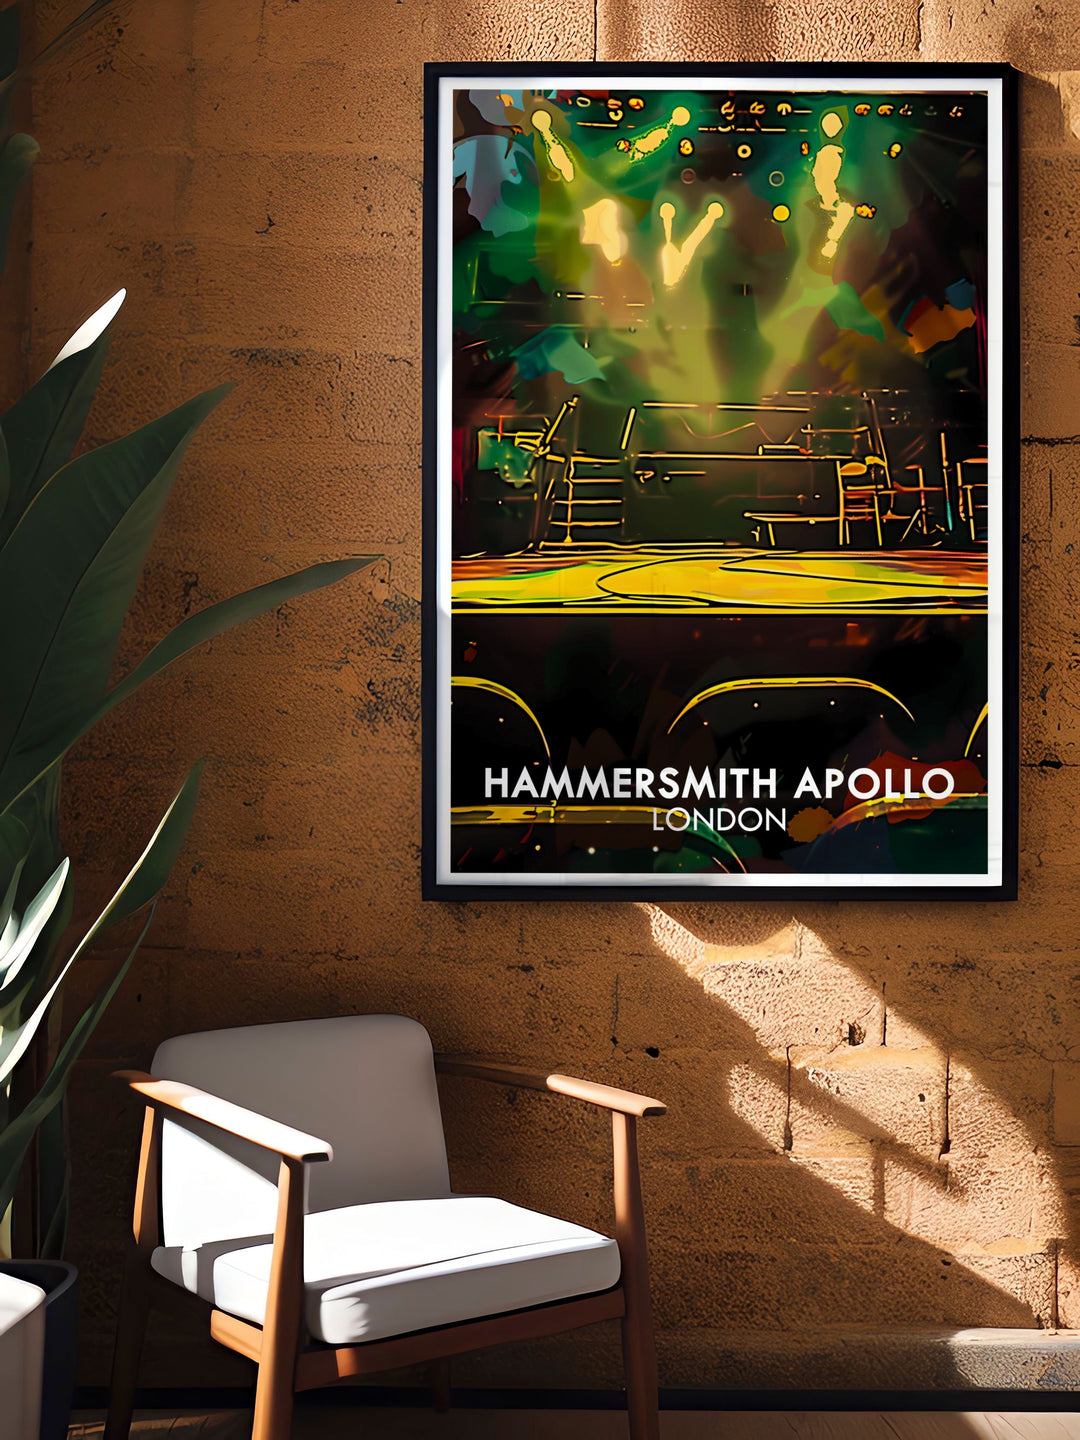 An intricate depiction of Hammersmith Apollo, this art print showcases the venues dynamic stage and historic charm, perfect for adding a touch of live performance magic to your decor.